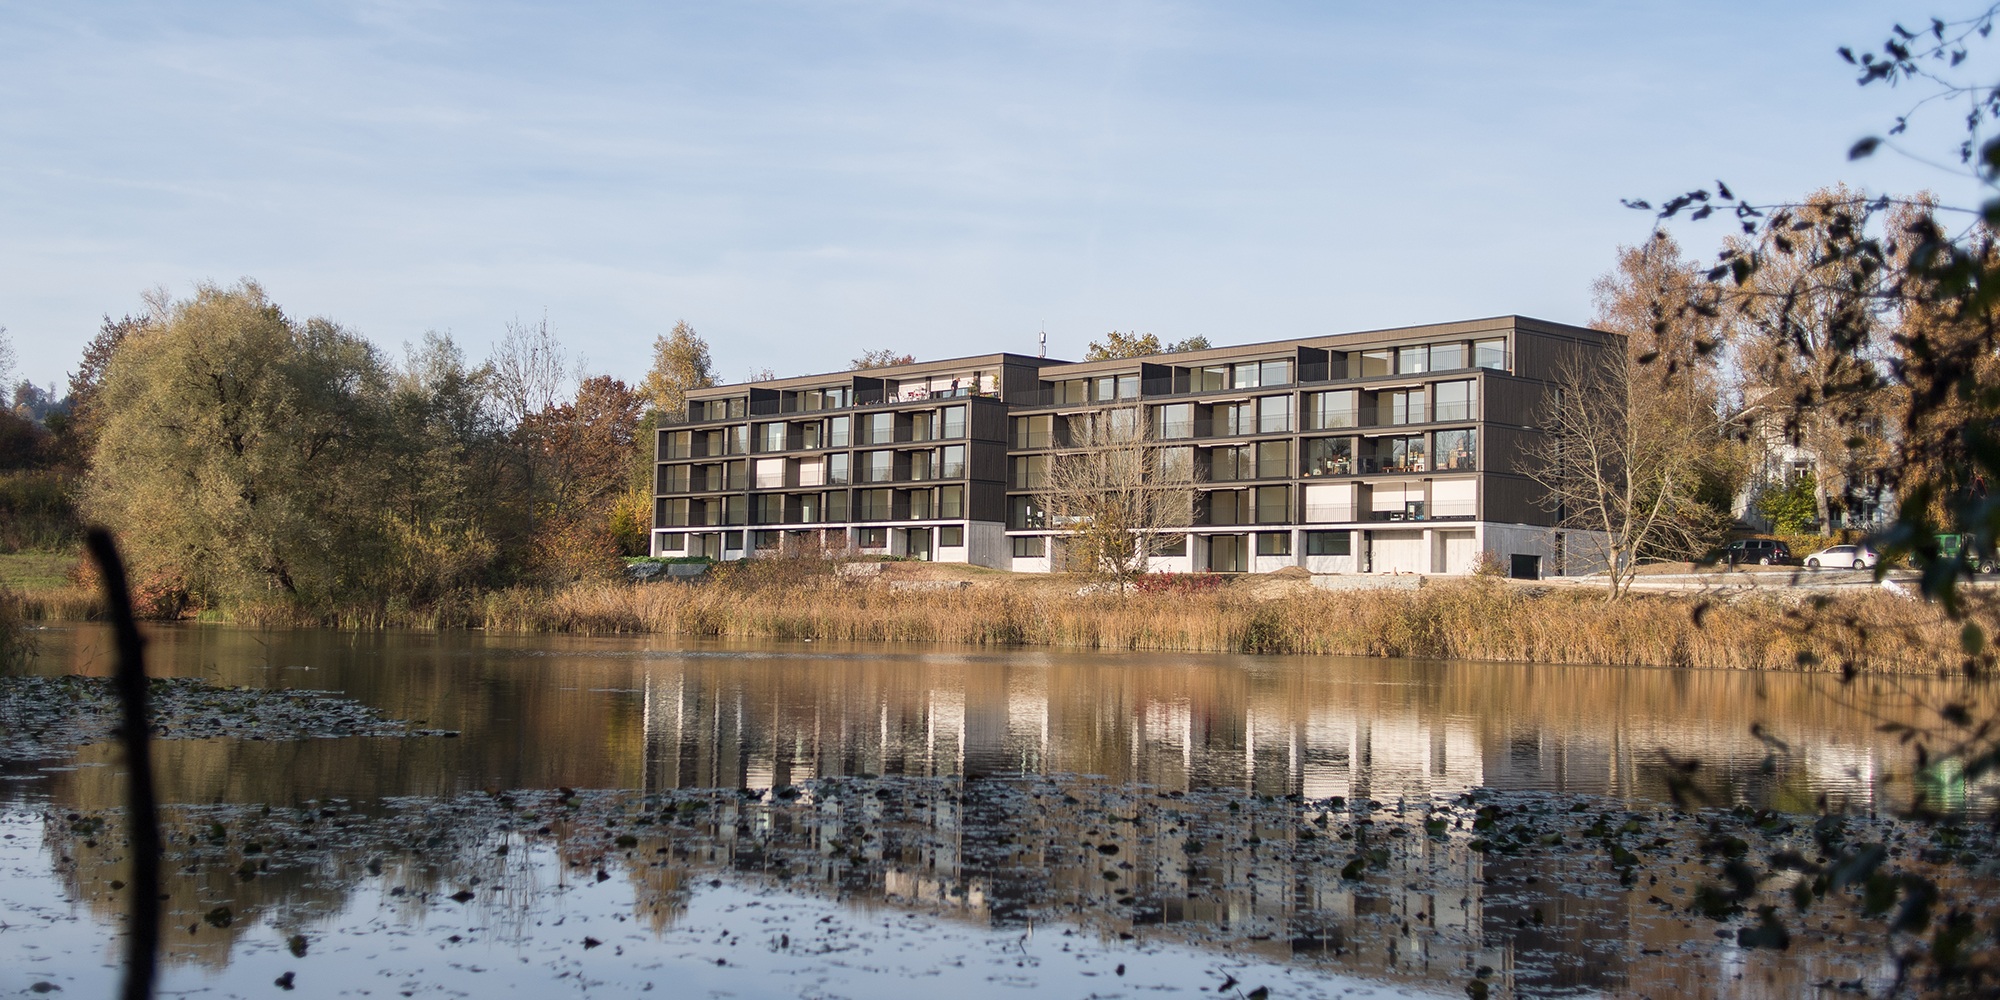 The apartment buildings are situated directly on the Bildweiher in Kräzern.